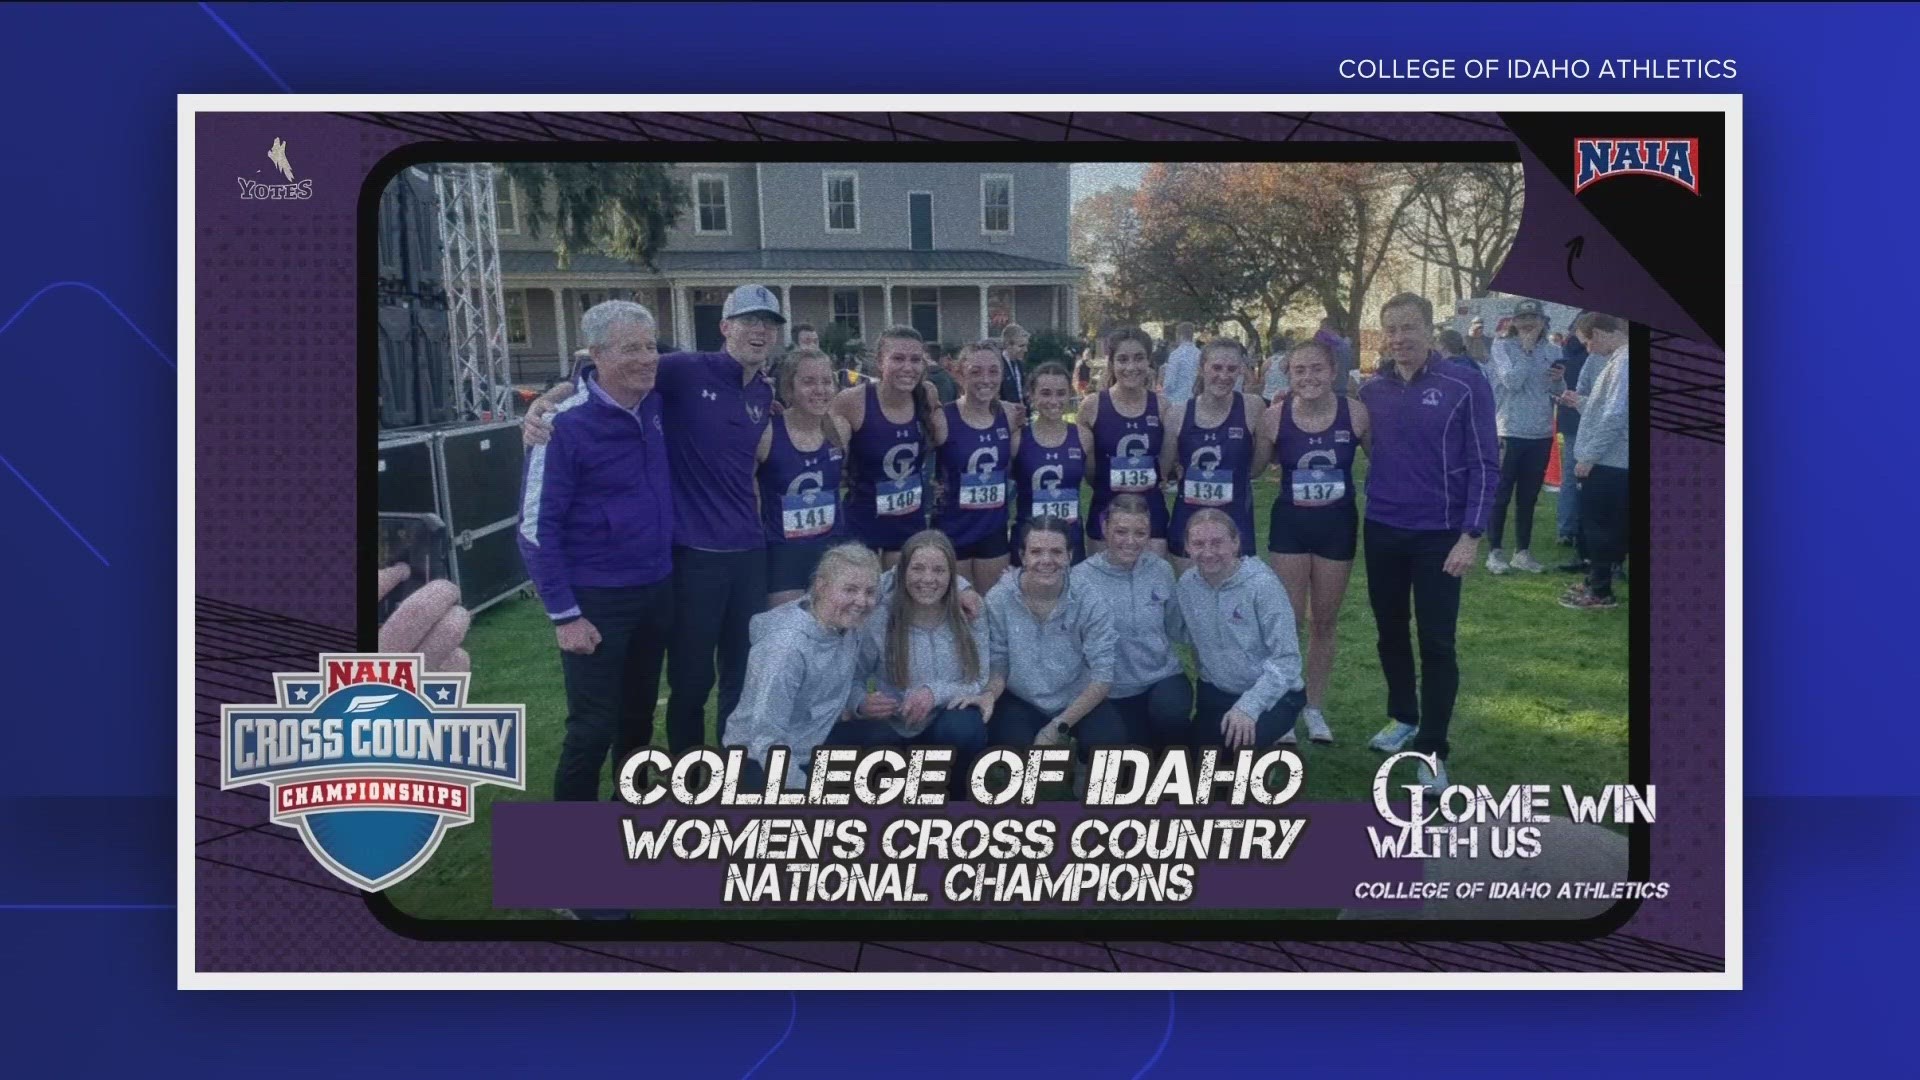 The College of Idaho women’s cross country team is a national champion for the first time in program history. Five Yotes finished in the top 10 on Friday.